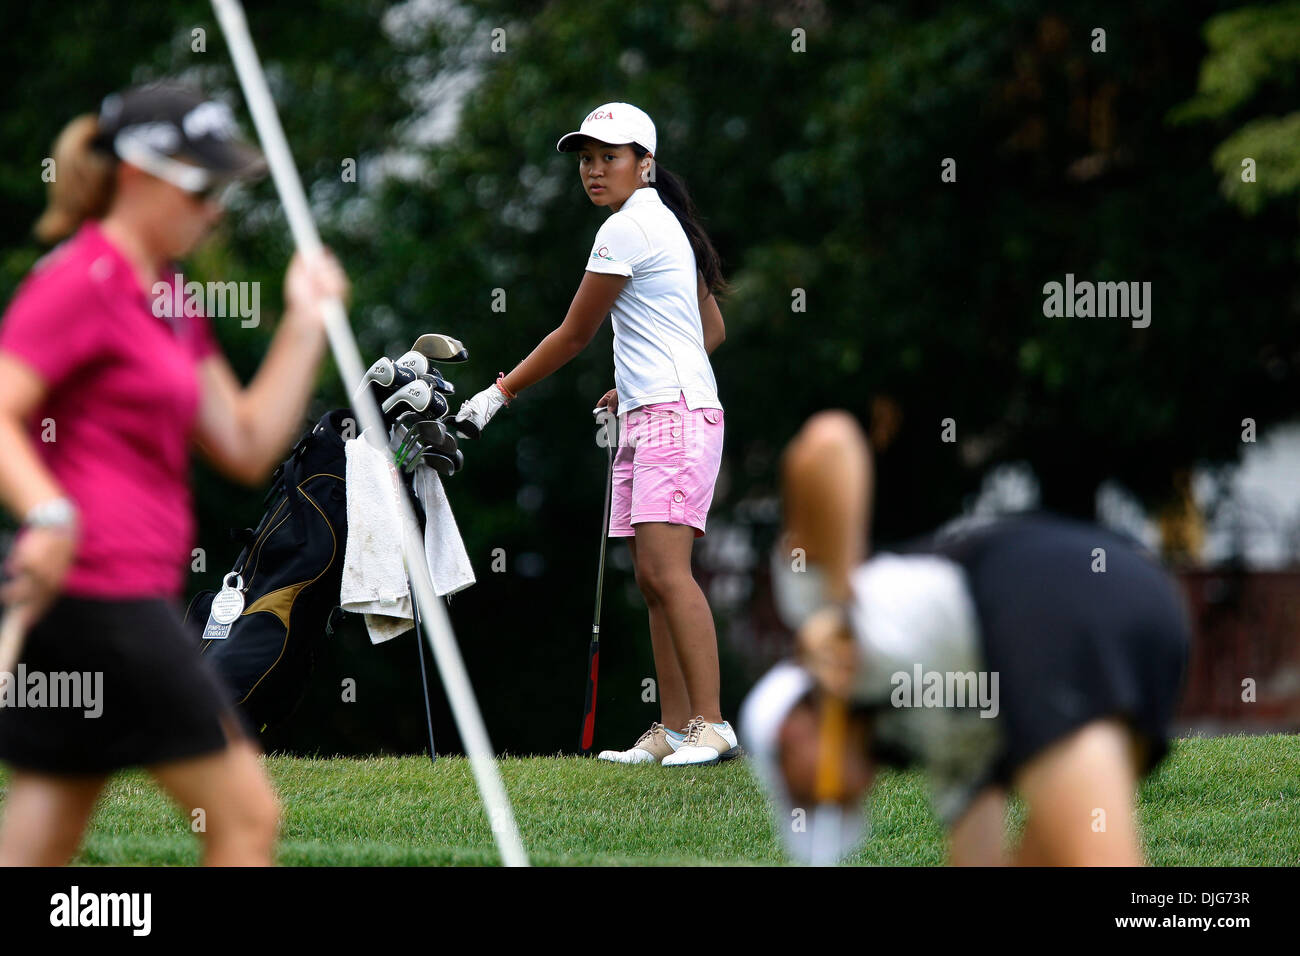 Jul 13, 2010 - Granger, Indiana, U.S. - PIMPLOY THIRATI, of Pathumtani, Thailand, prepares to putt Tuesday during the Women's Western Golf Association 84th National Junior Championship at Knollwood Country Club in Granger, Indiana. Thirati finished the two day qualifying round with a score of 155 and advanced to the championship flight starting Wednesday. The final round of match p Stock Photo